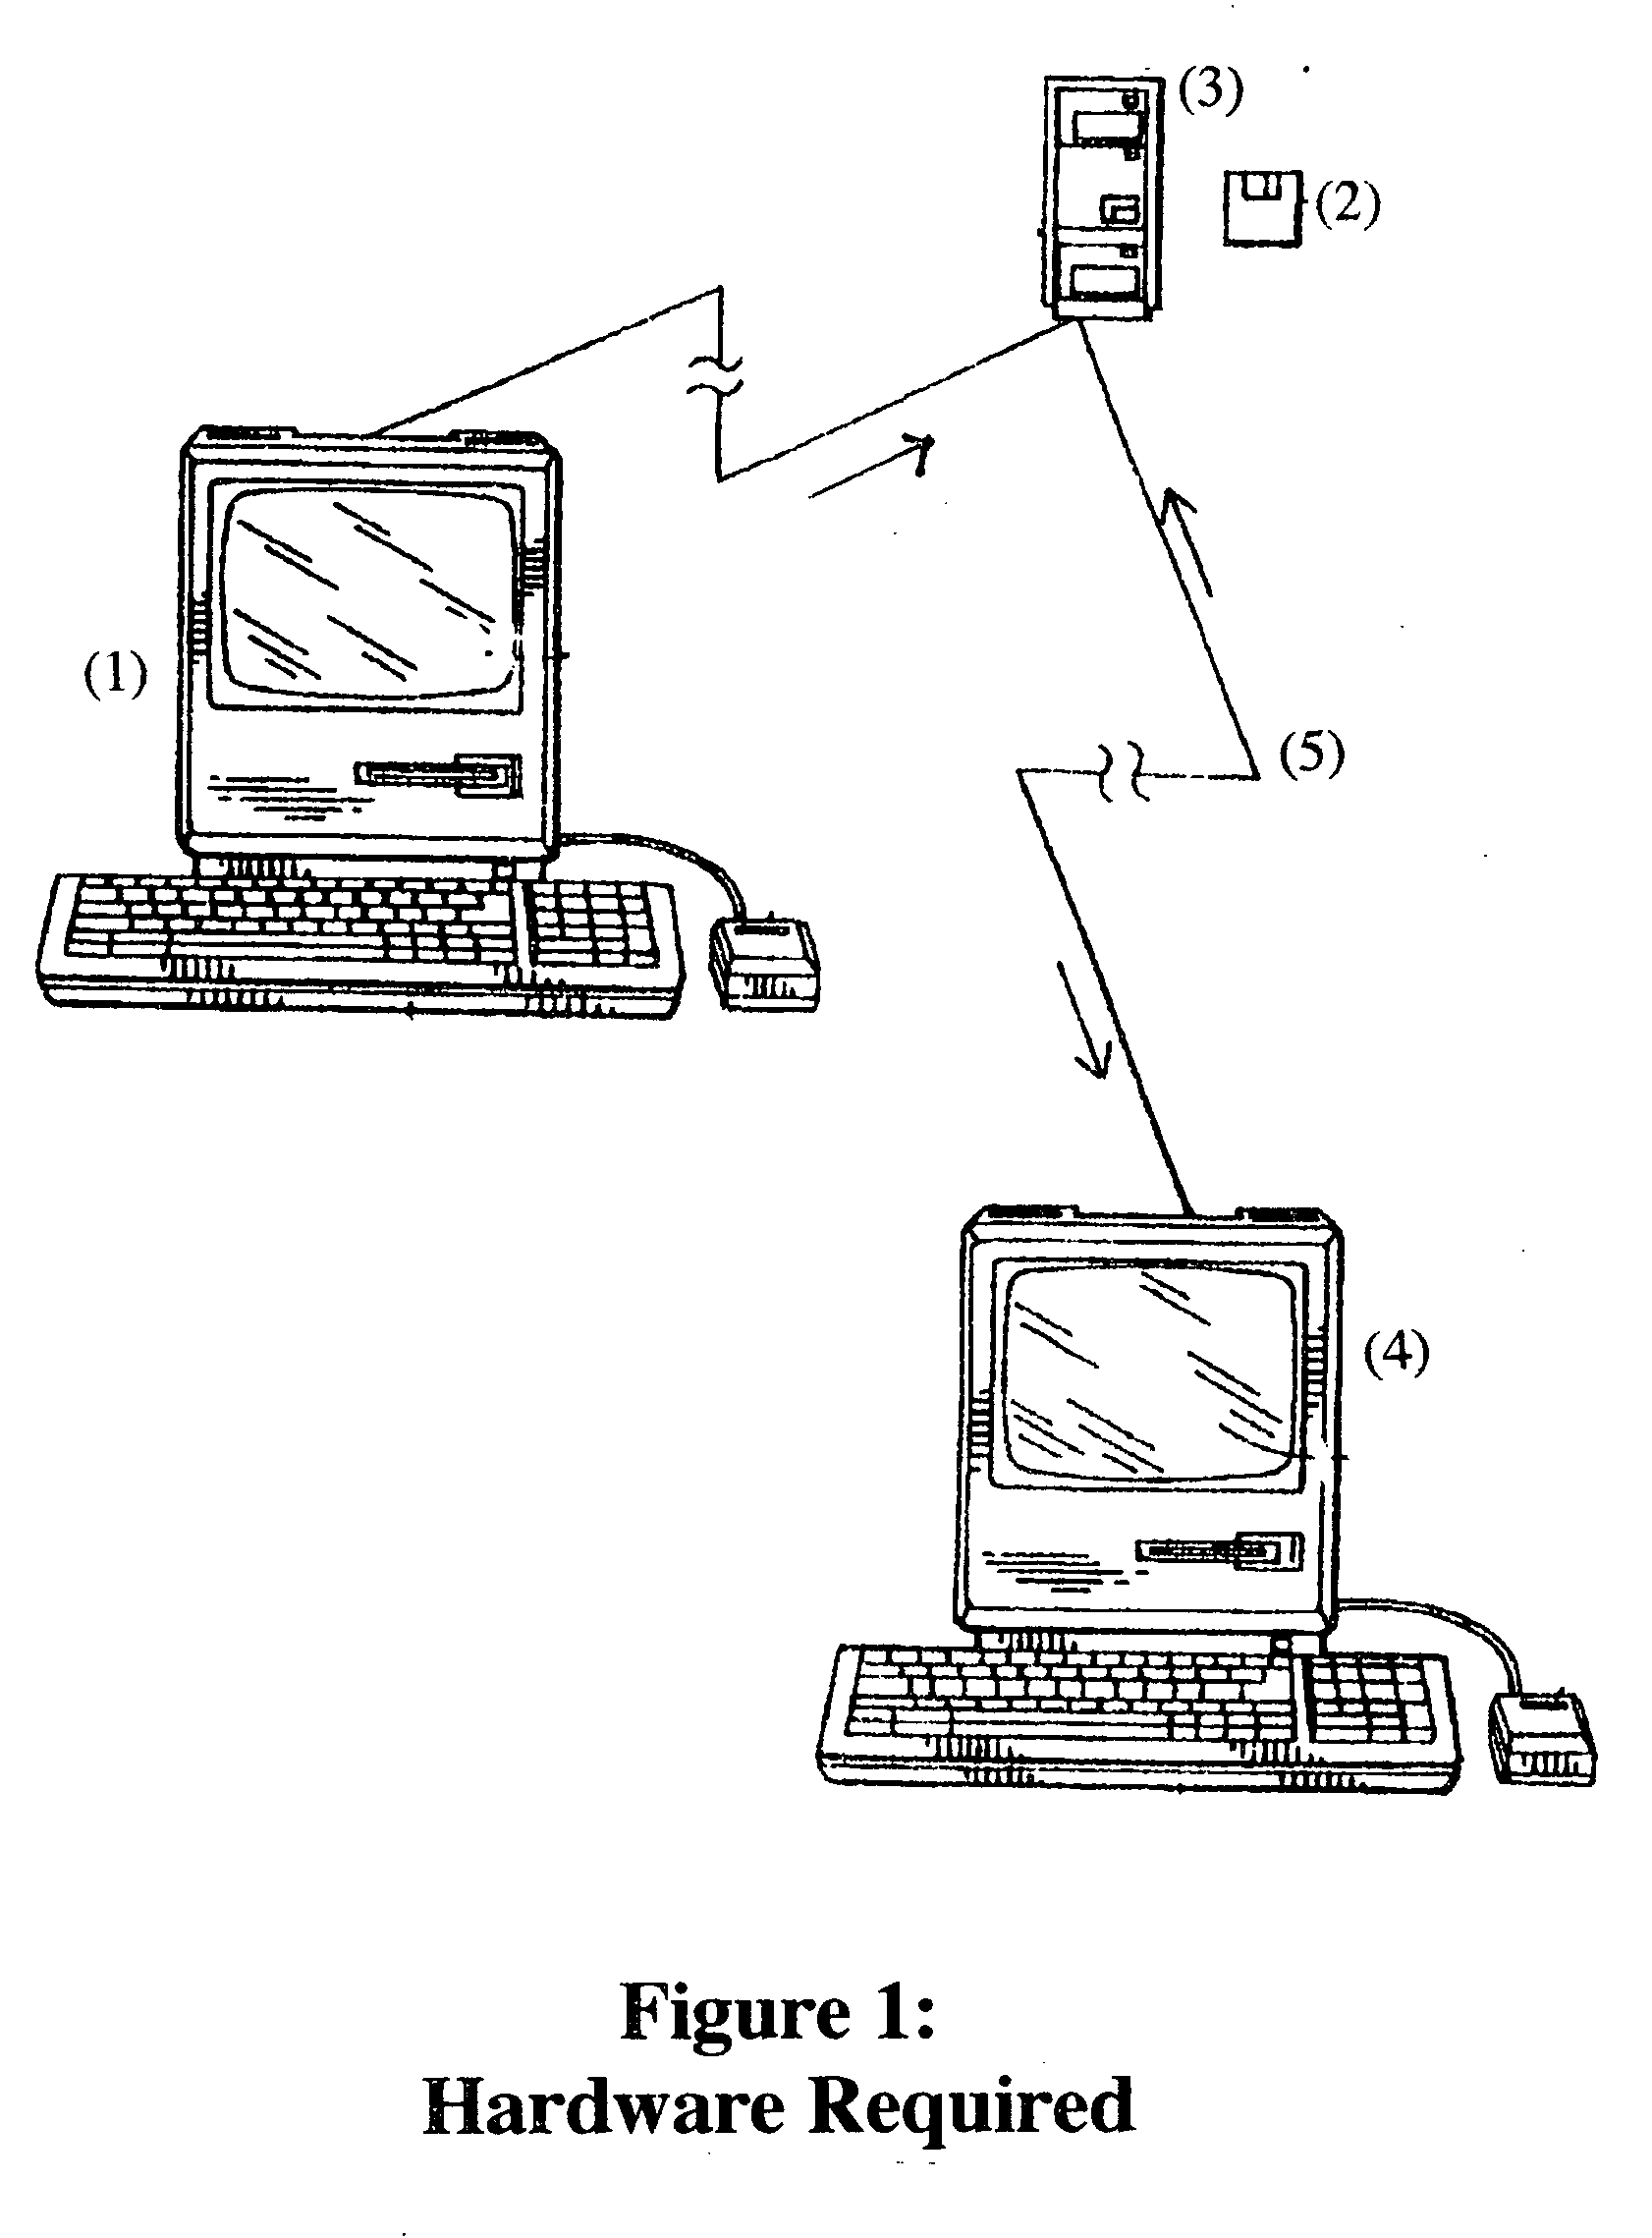 Schechinger/Fennell System and method for filtering search results by utilizing user-selected parametric values from a self-defined drop-down list on a website"